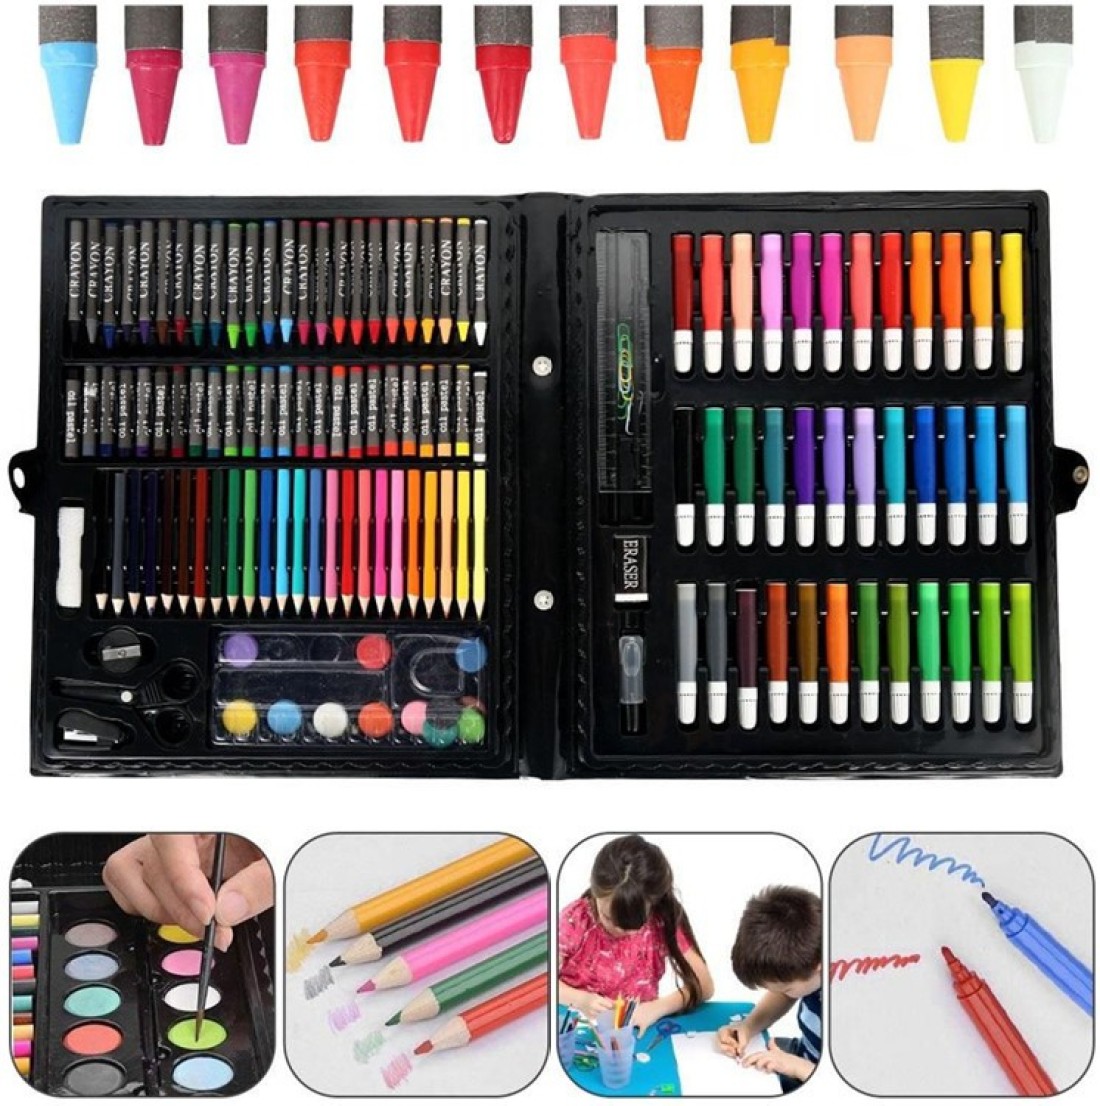 SHK Digitrade Unicorn Blue Stationery Set Art Drawing Sets,  Colored Pencil Drawing Art Marker Pen Set with Crayon Oil Paint Brush  Drawing Professional Art Set Gift for Children Kids -145